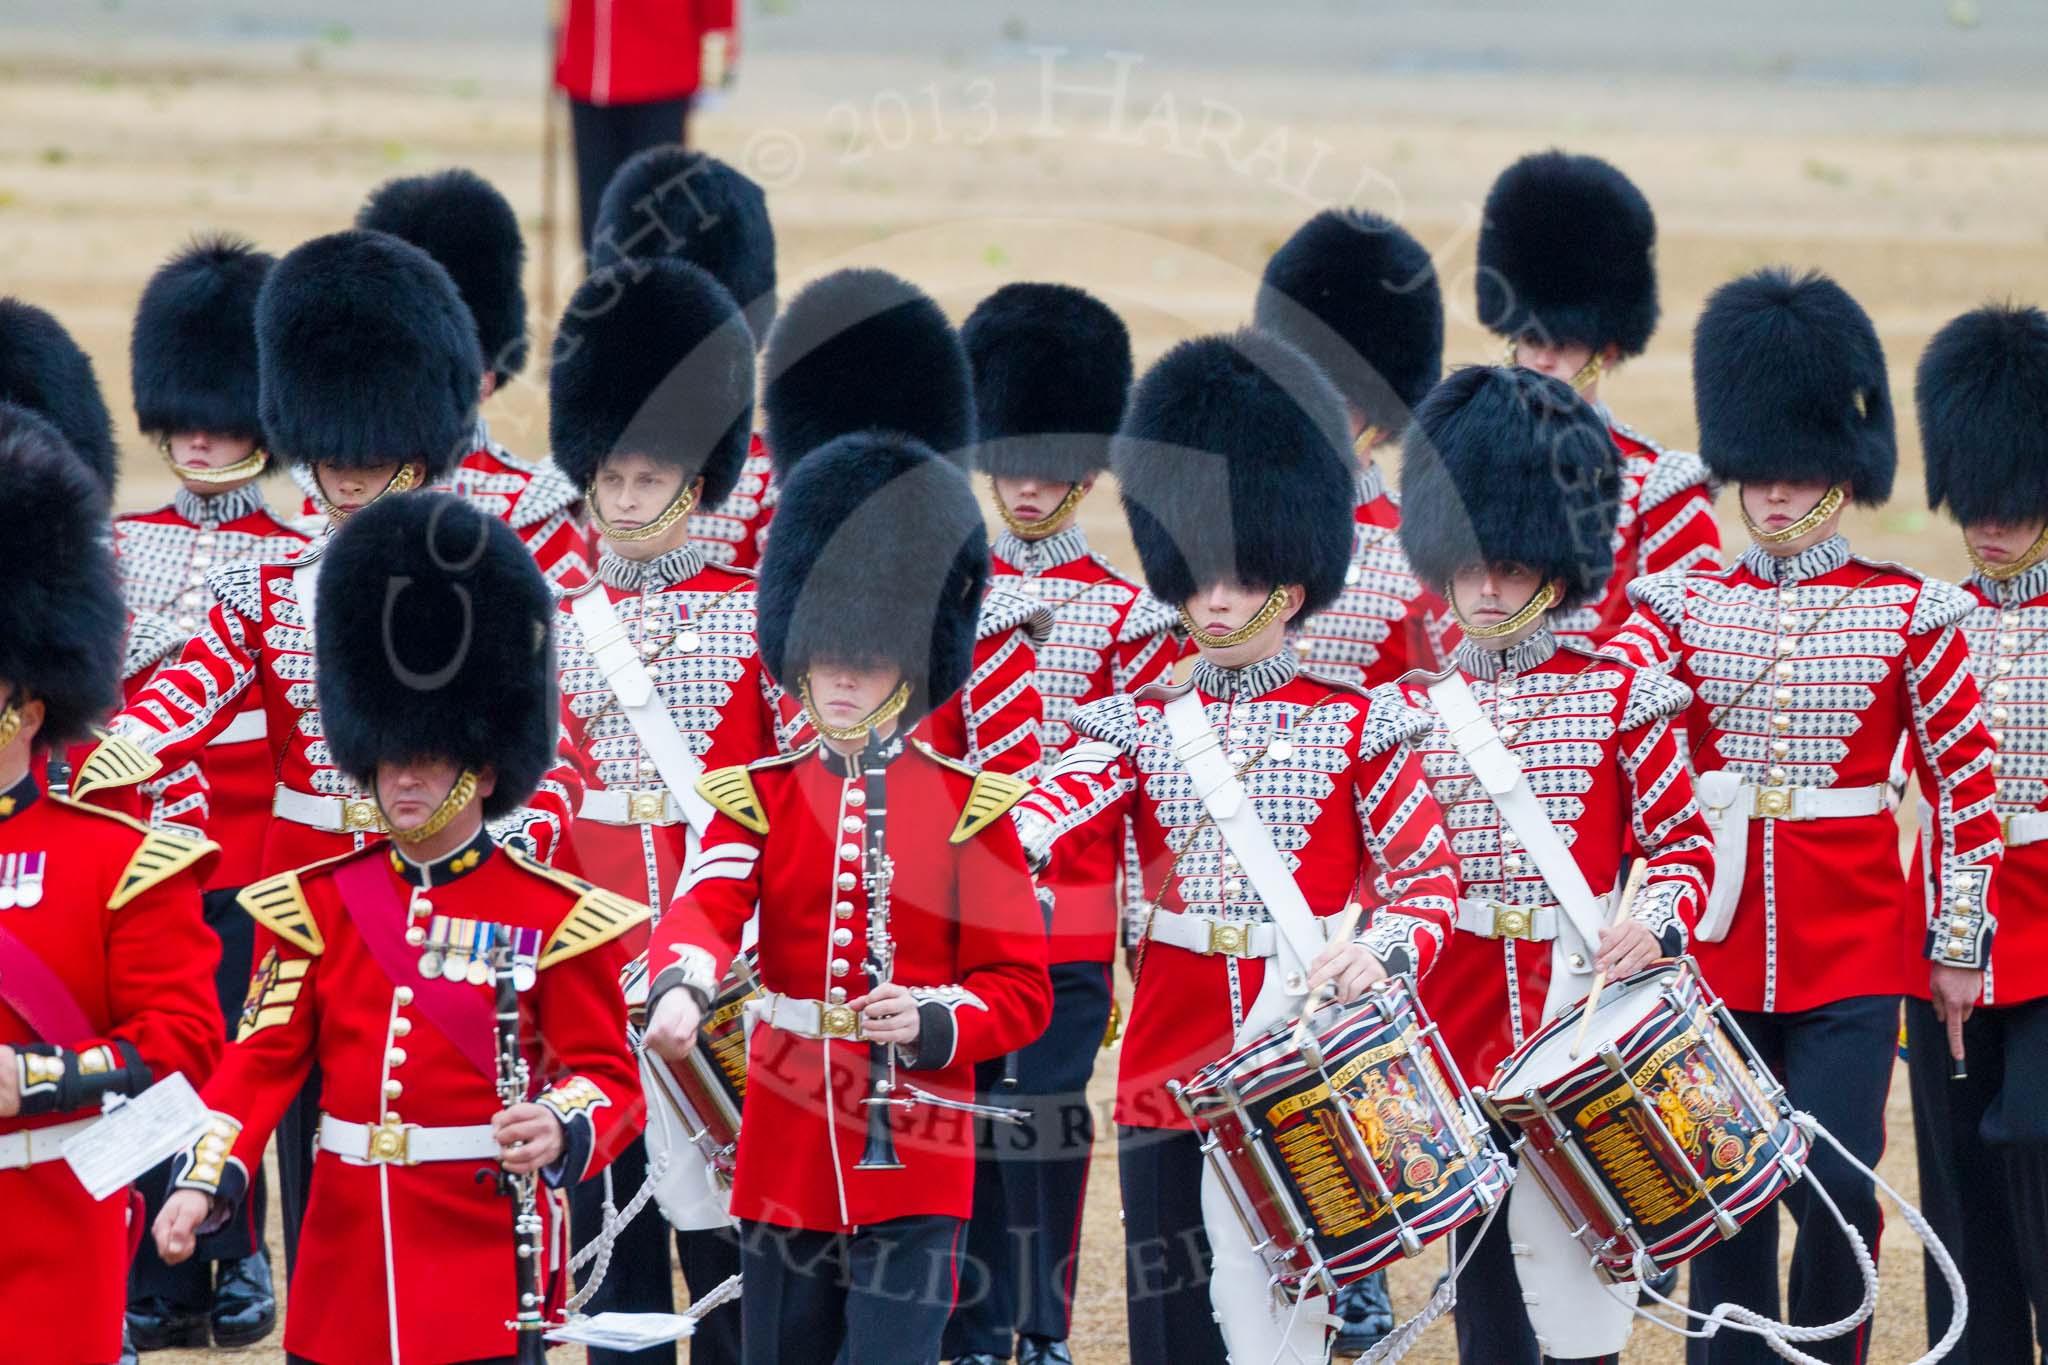 Trooping the Colour 2015. Image #108, 13 June 2015 10:29 Horse Guards Parade, London, UK